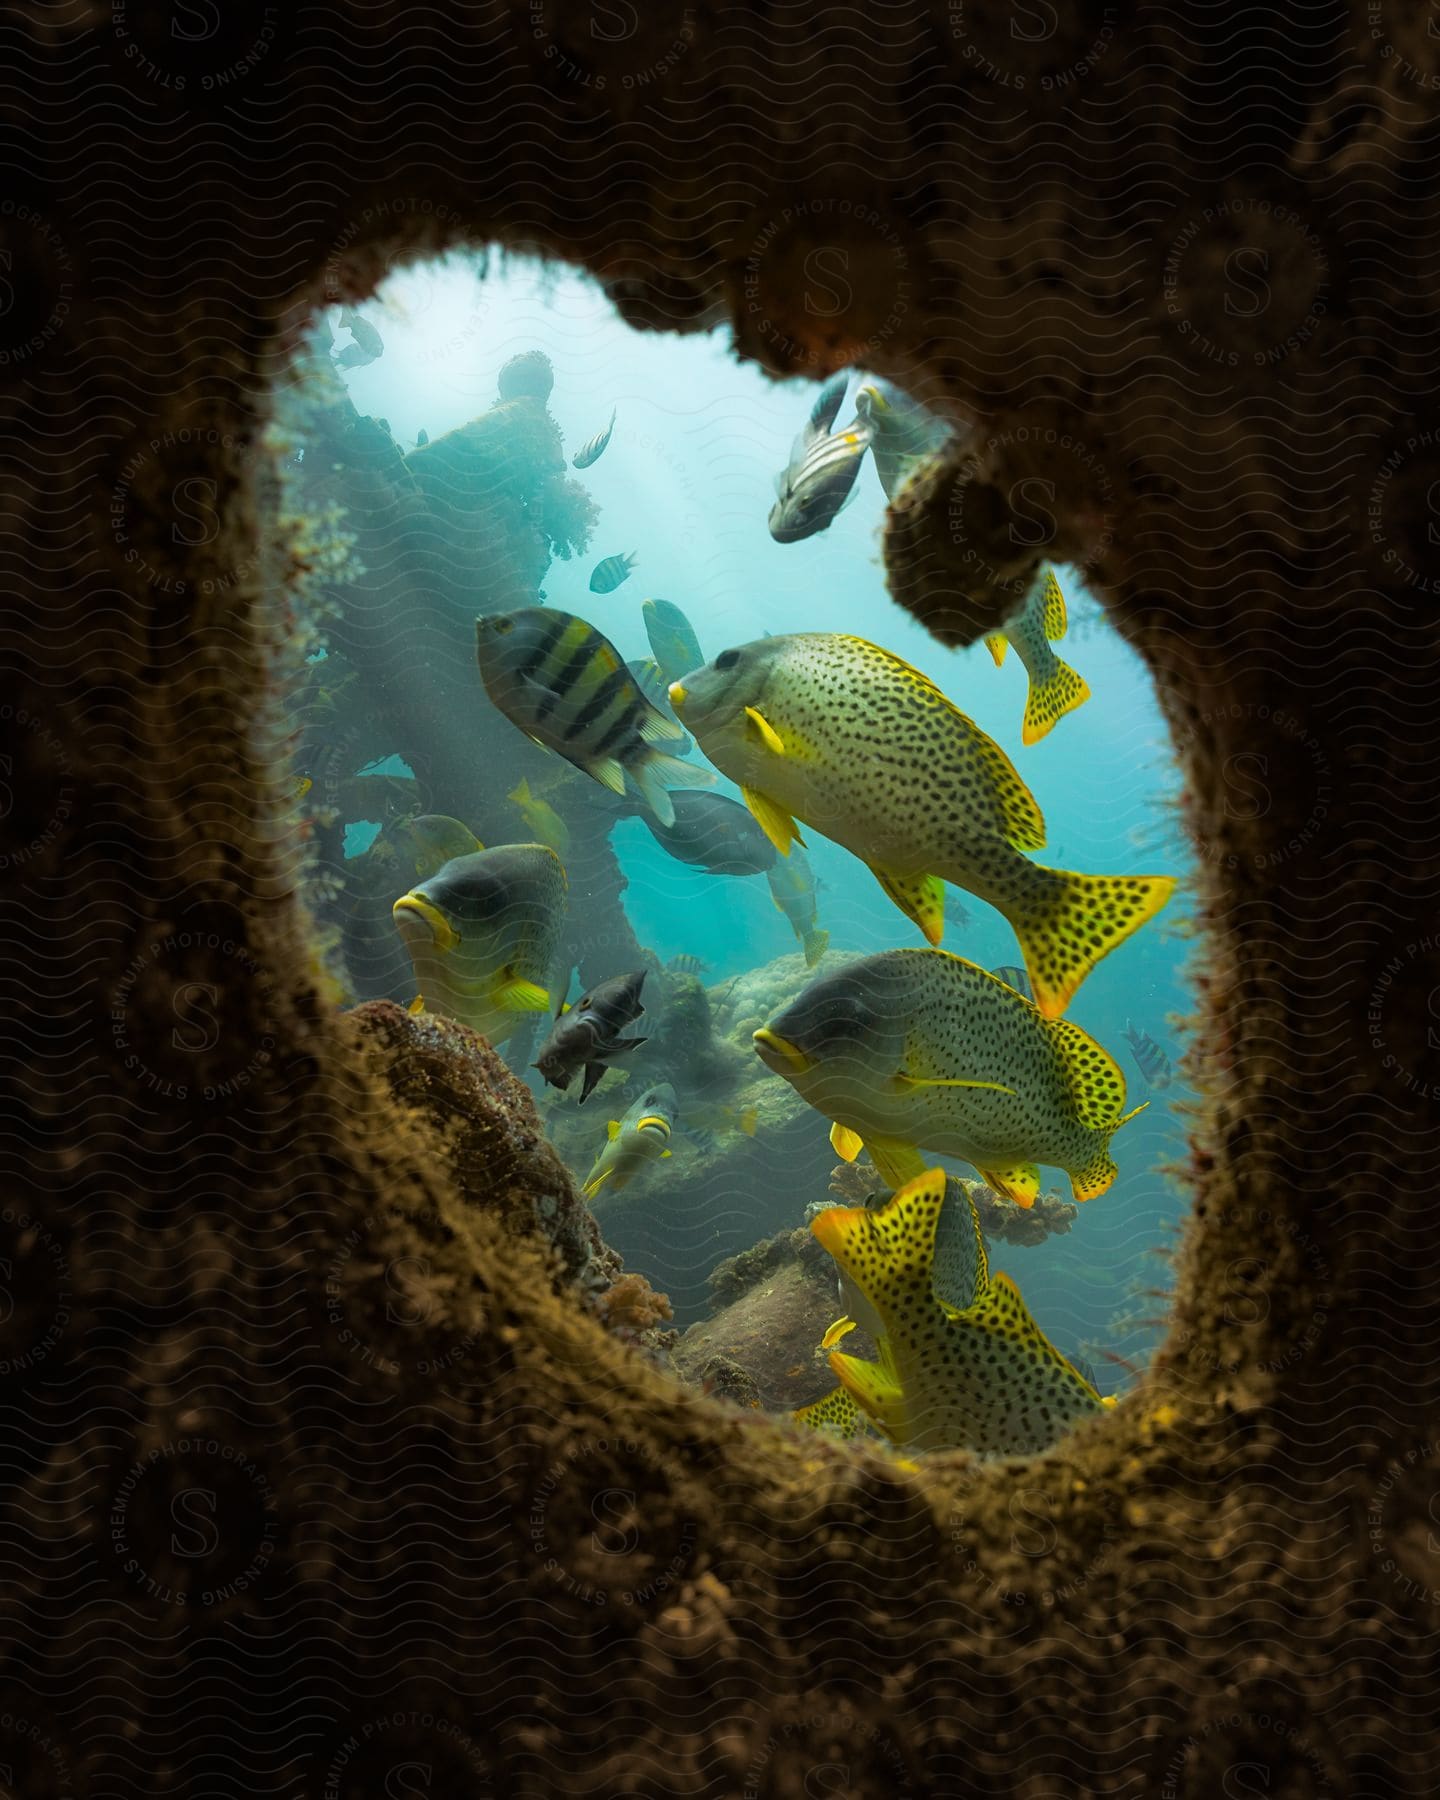 A school of fish with spotted yellow and striped black and yellow patterns swim through the ocean